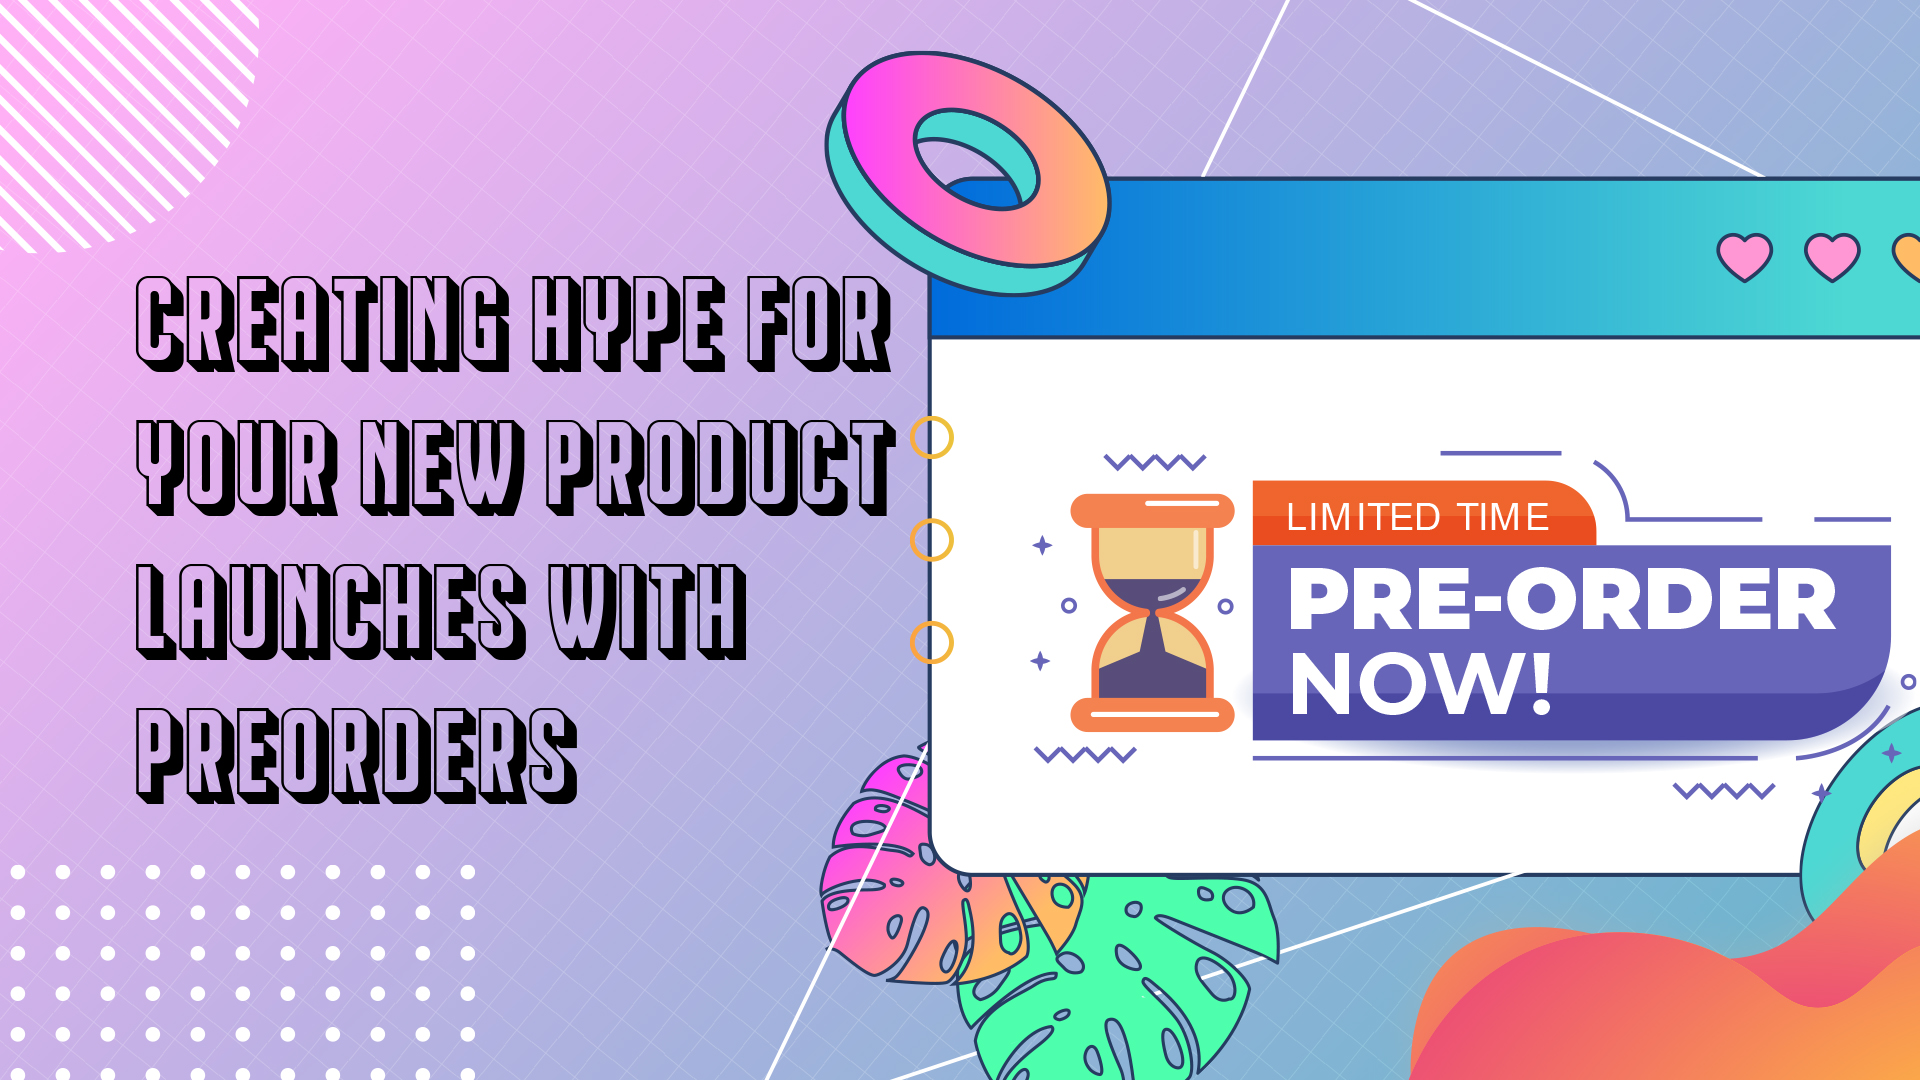 Creating hype for your new product launches with preorders